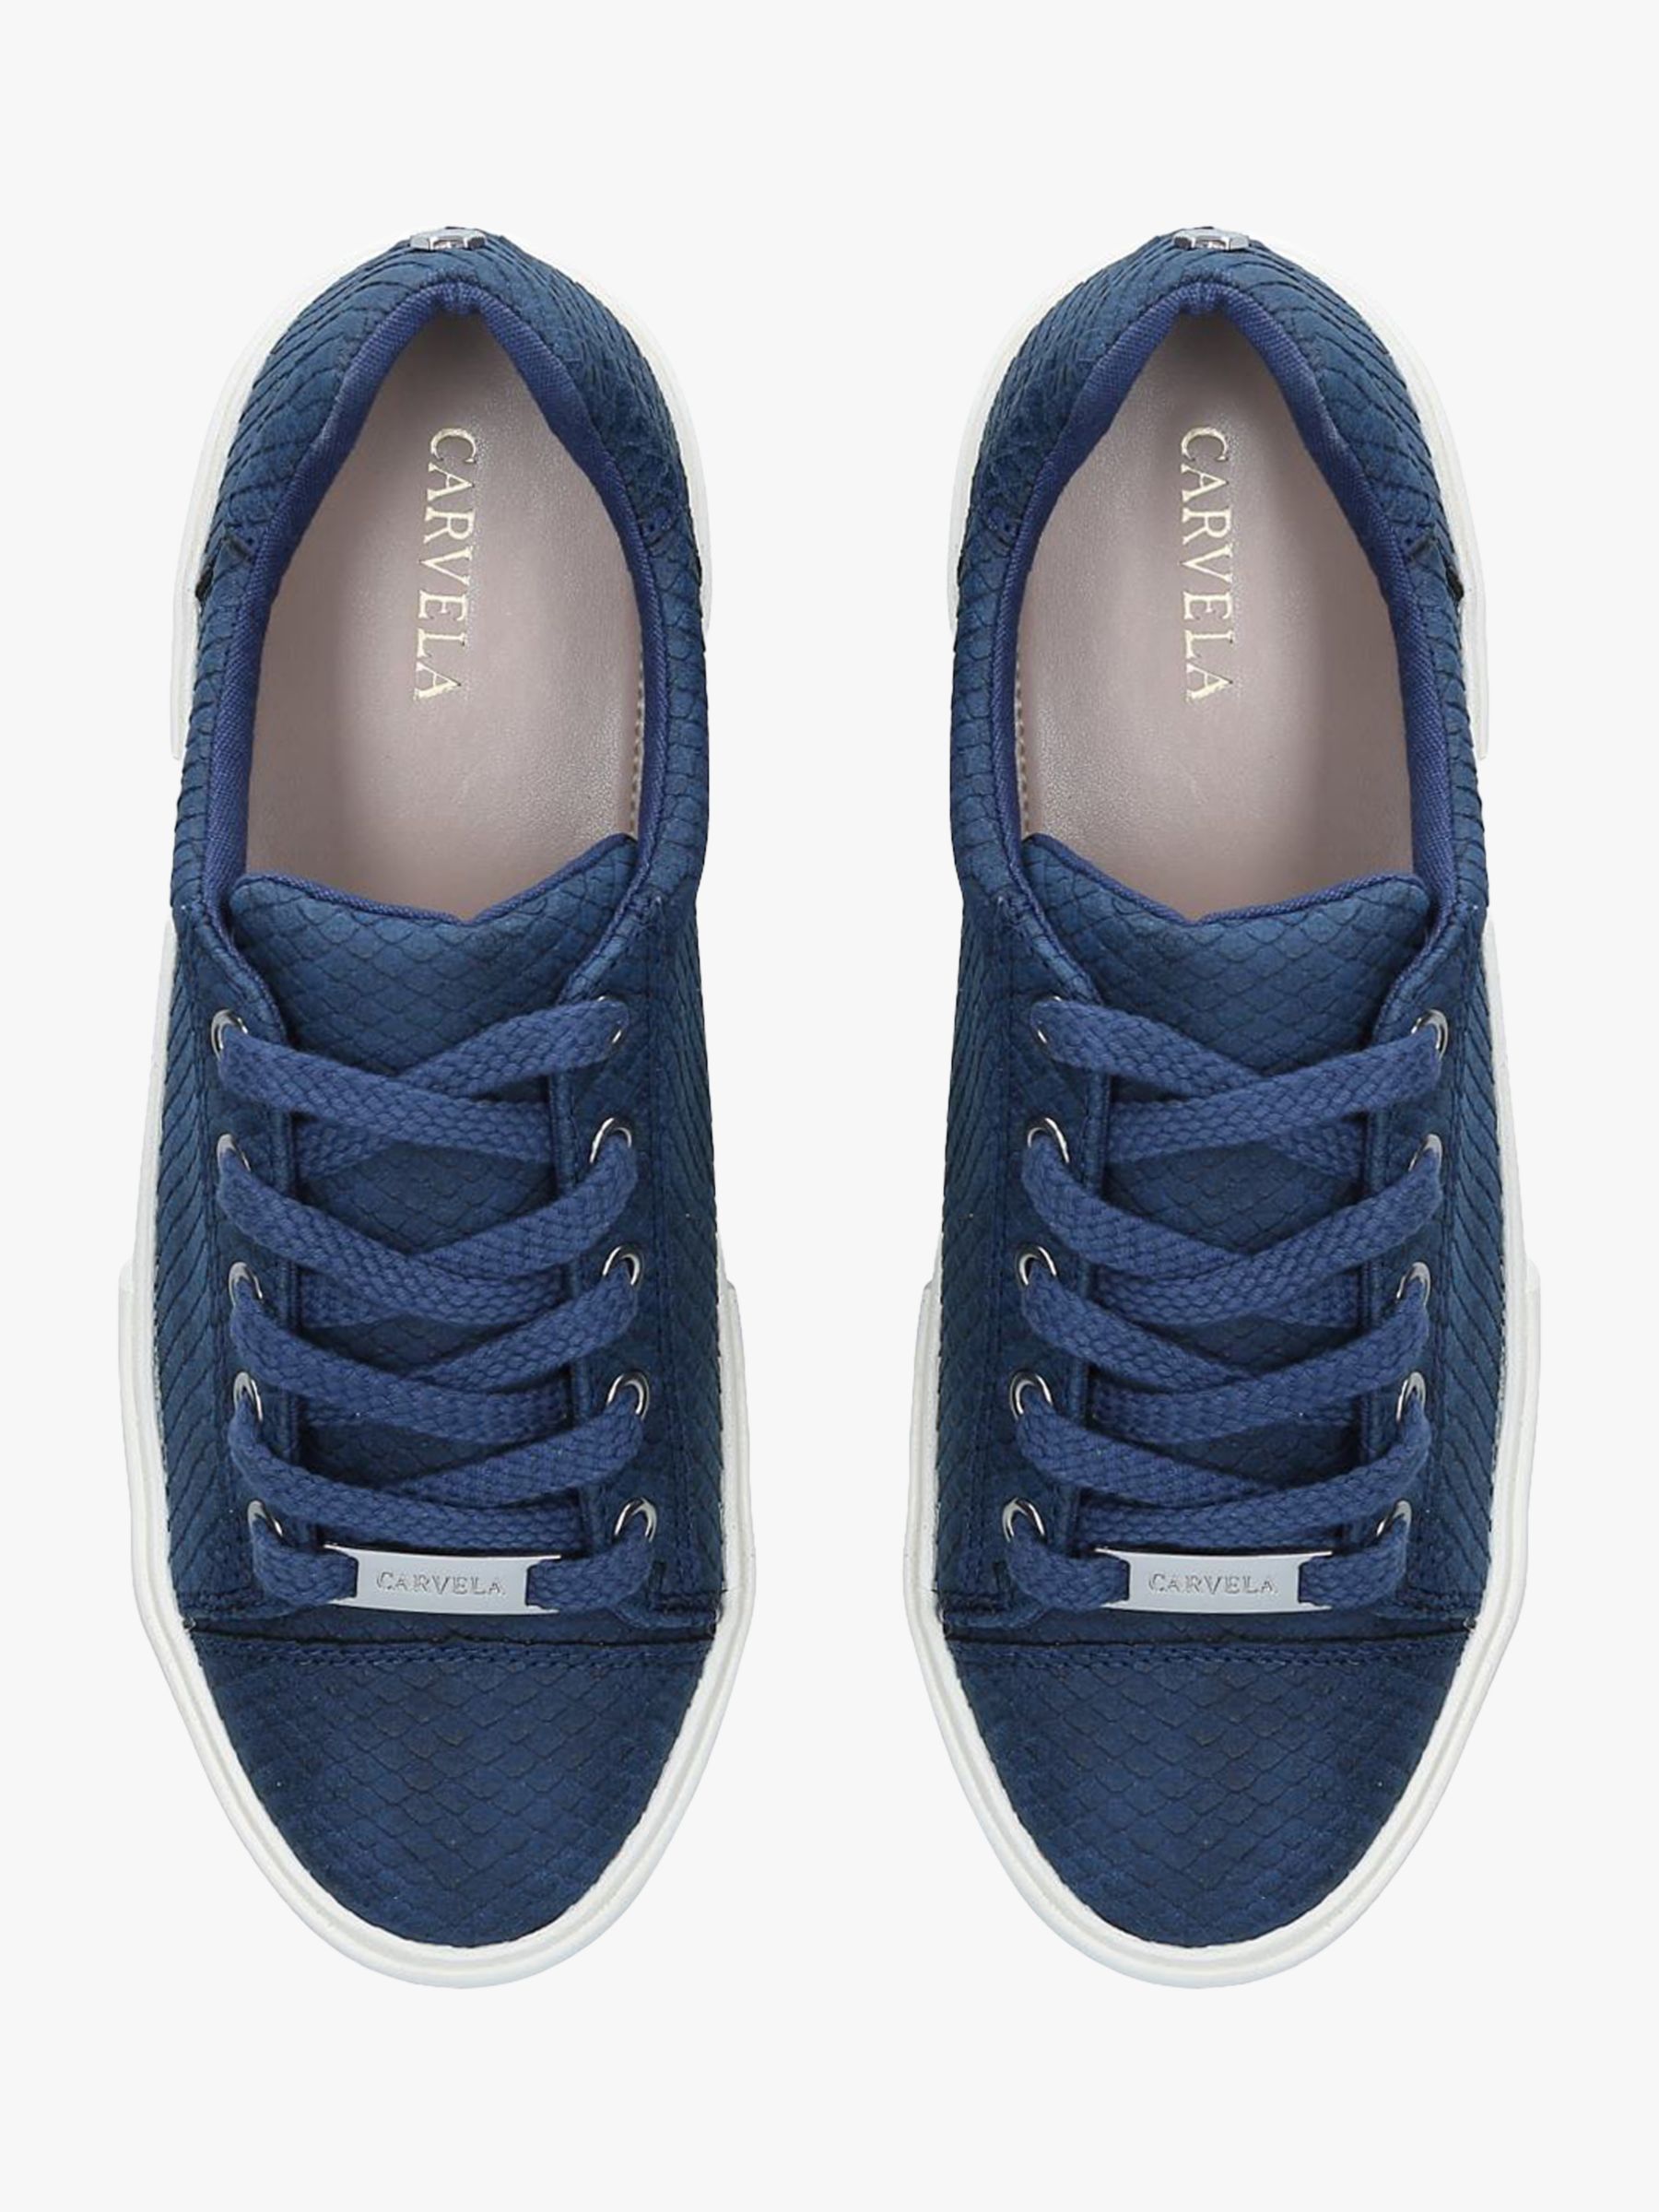 Carvela Light Lace Up Trainers, Navy at John Lewis & Partners